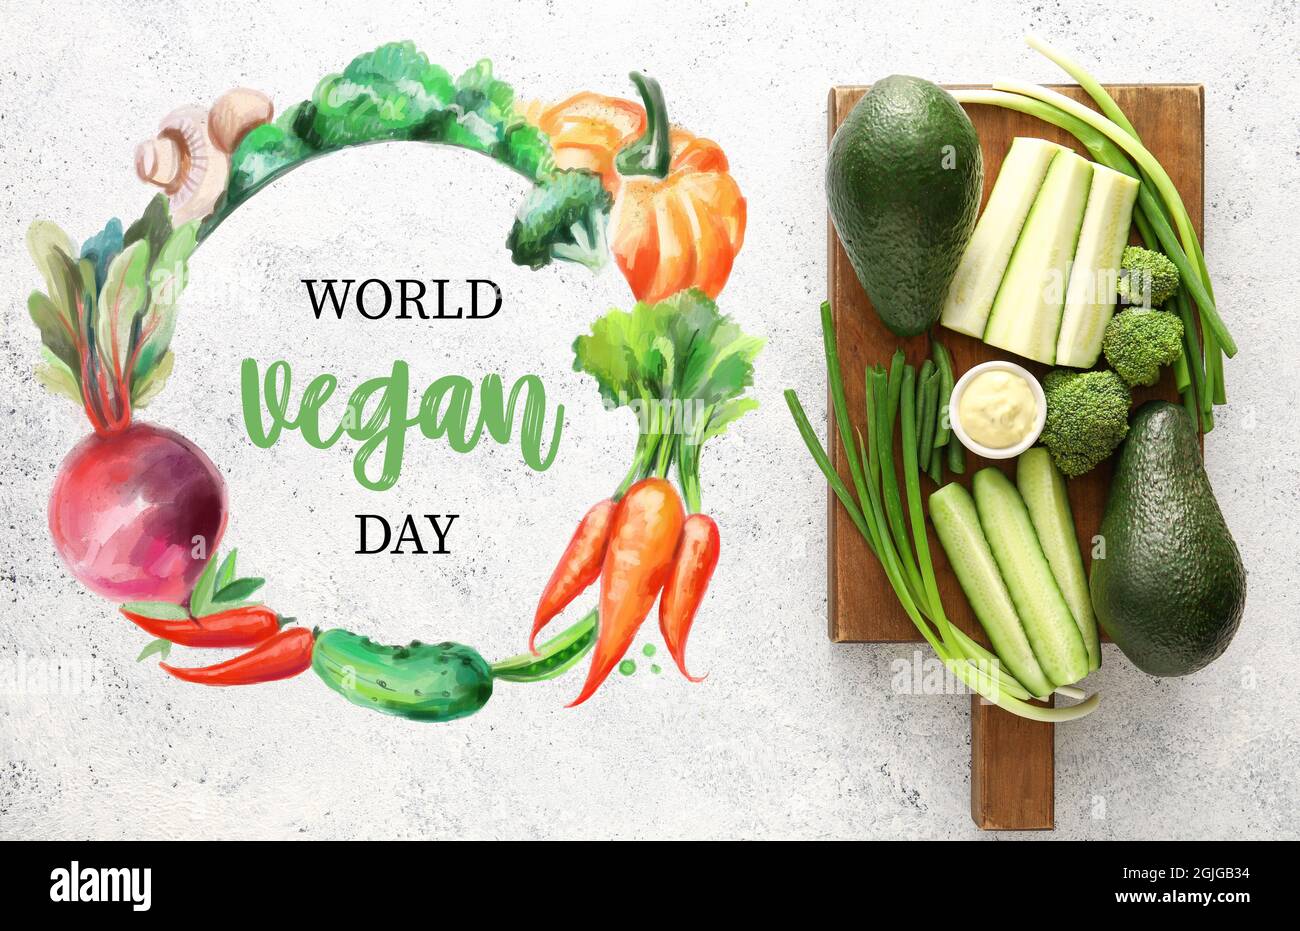 Greeting card for World Vegan Day with fresh vegetables Stock Photo